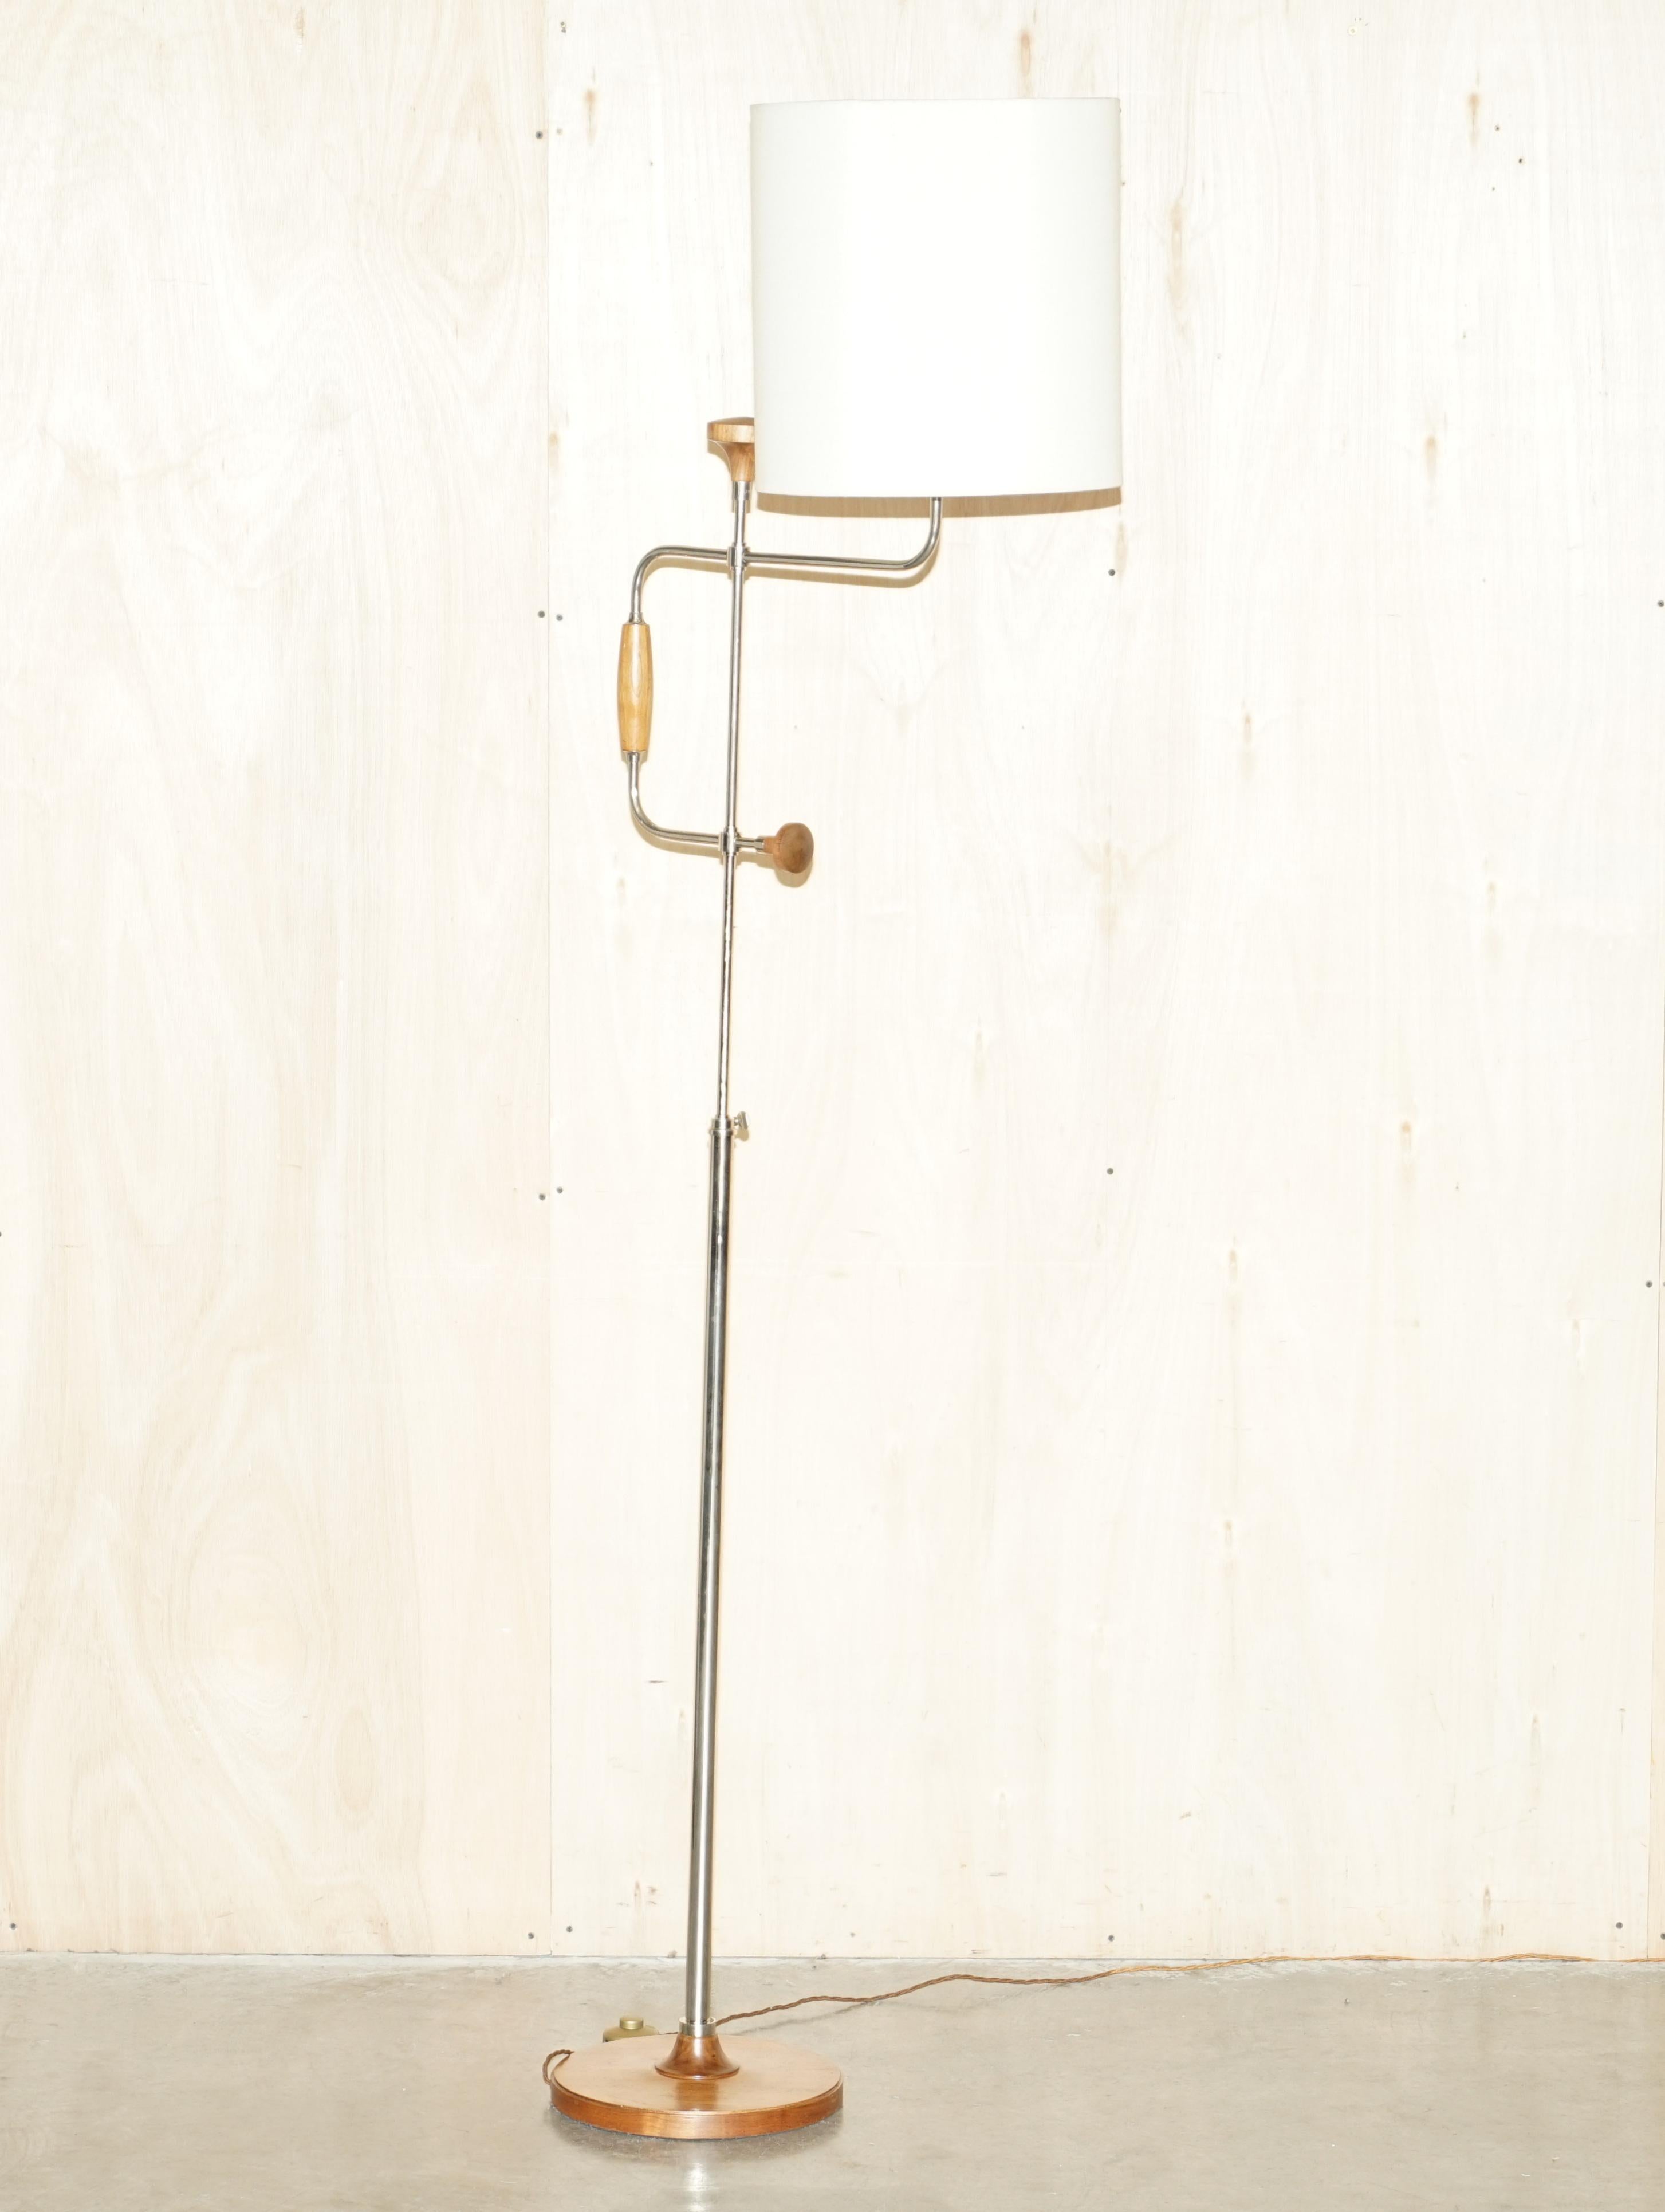 Hand-Crafted PAIR OF ViNTAGE DAVID LINLEY ADJUSTABLE TELESCOPIC FLOOR LAMPS ORIGINAL SHADEs For Sale